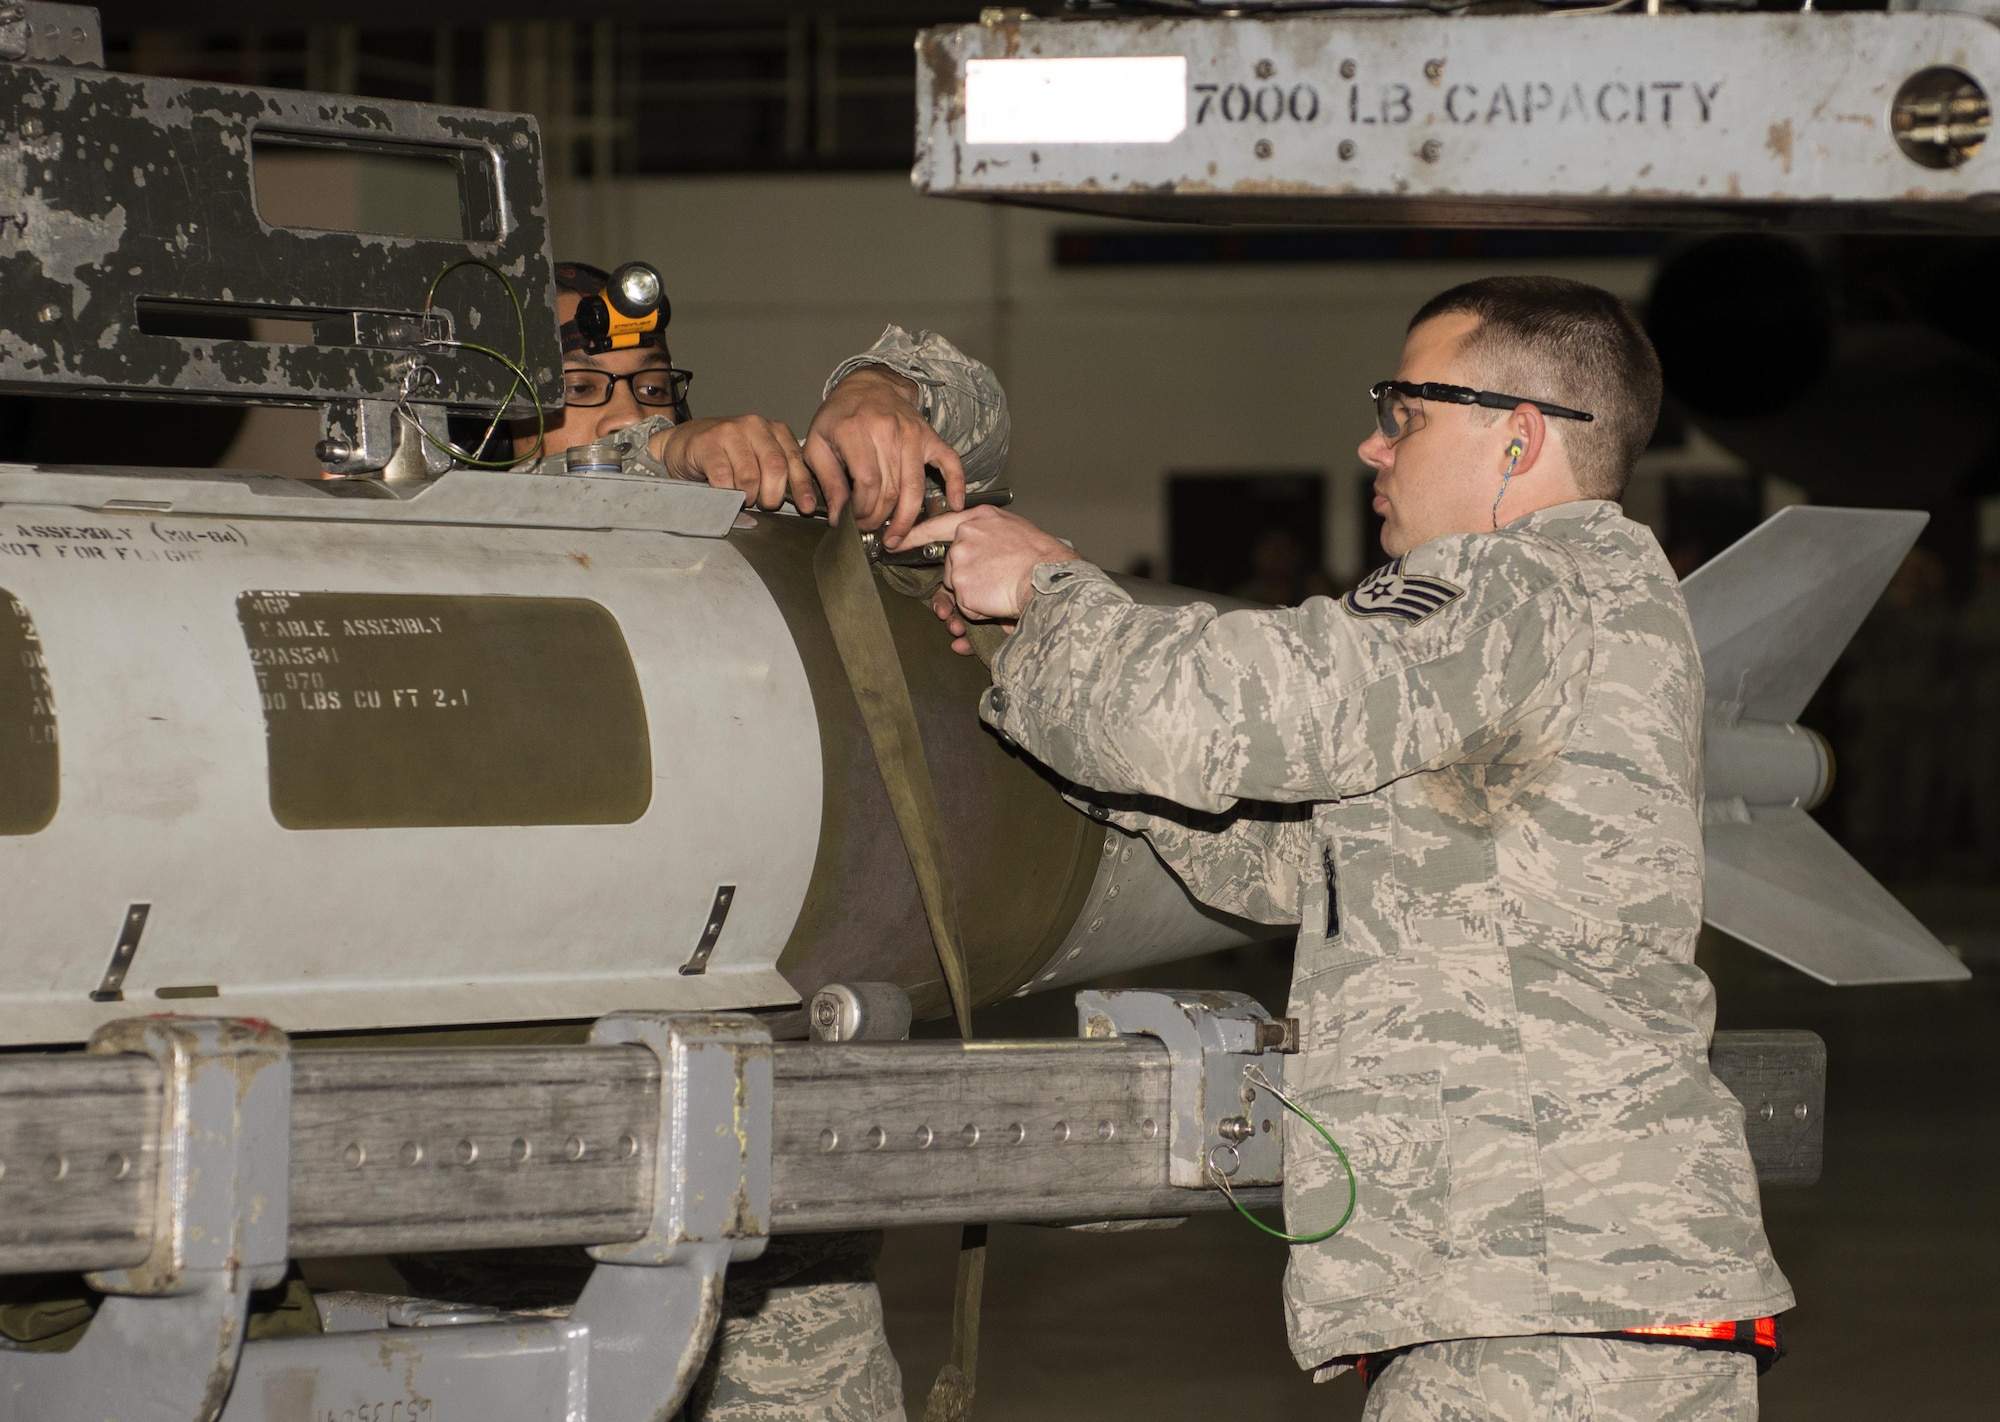 Staff Sgt. Eric Hathaway, 69th Aircraft Maintenance Unit weapons load crew chief, and Senior Airman Philip Johnson, 69th AMU weapons load crew member, strap an inert munition in place during the 5th Bomb Wing Load Crew of the Quarter competition in Dock 7 at Minot Air Force Base, N.D., Jan. 20, 2017. Hathaway and Johnson, assigned to the 5th Aircraft Maintenance Squadron, represented the 69th Air Maintenance Unit during the competition. (U.S. Air Force photo/Airman 1st Class Alyssa M. Akers)